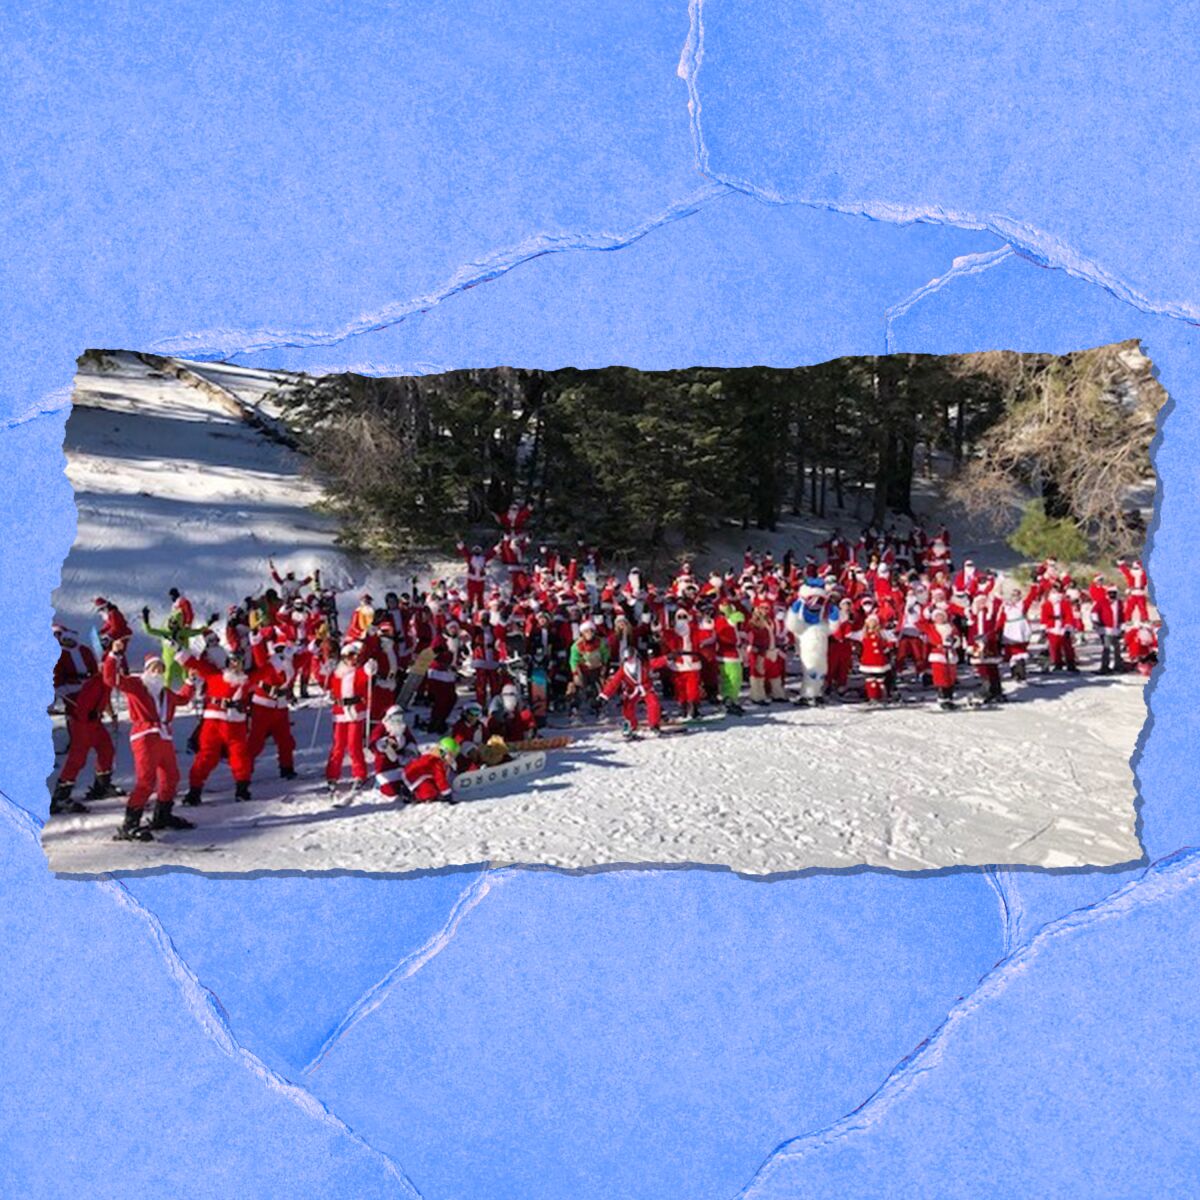 Dozens of people in red suits and white beards wave while standing on a snowy slope.